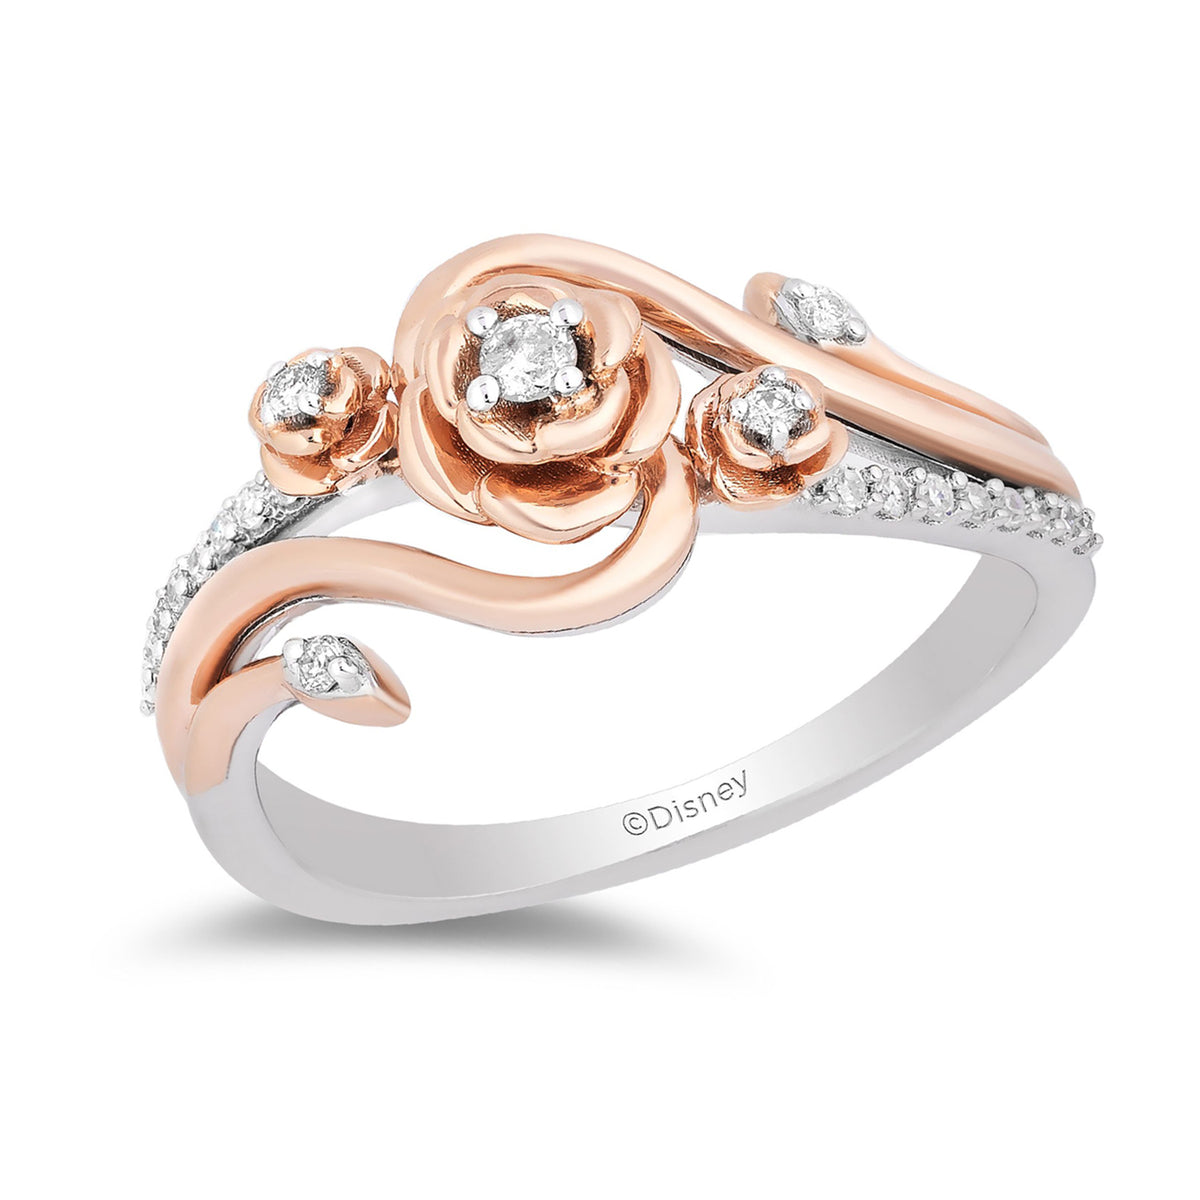 contact knal Presentator Disney Belle Inspired Diamond Rose Ring in 14K Rose Gold over Sterling  Silver 1/6 CTTW | Enchanted Disney Fine Jewelry